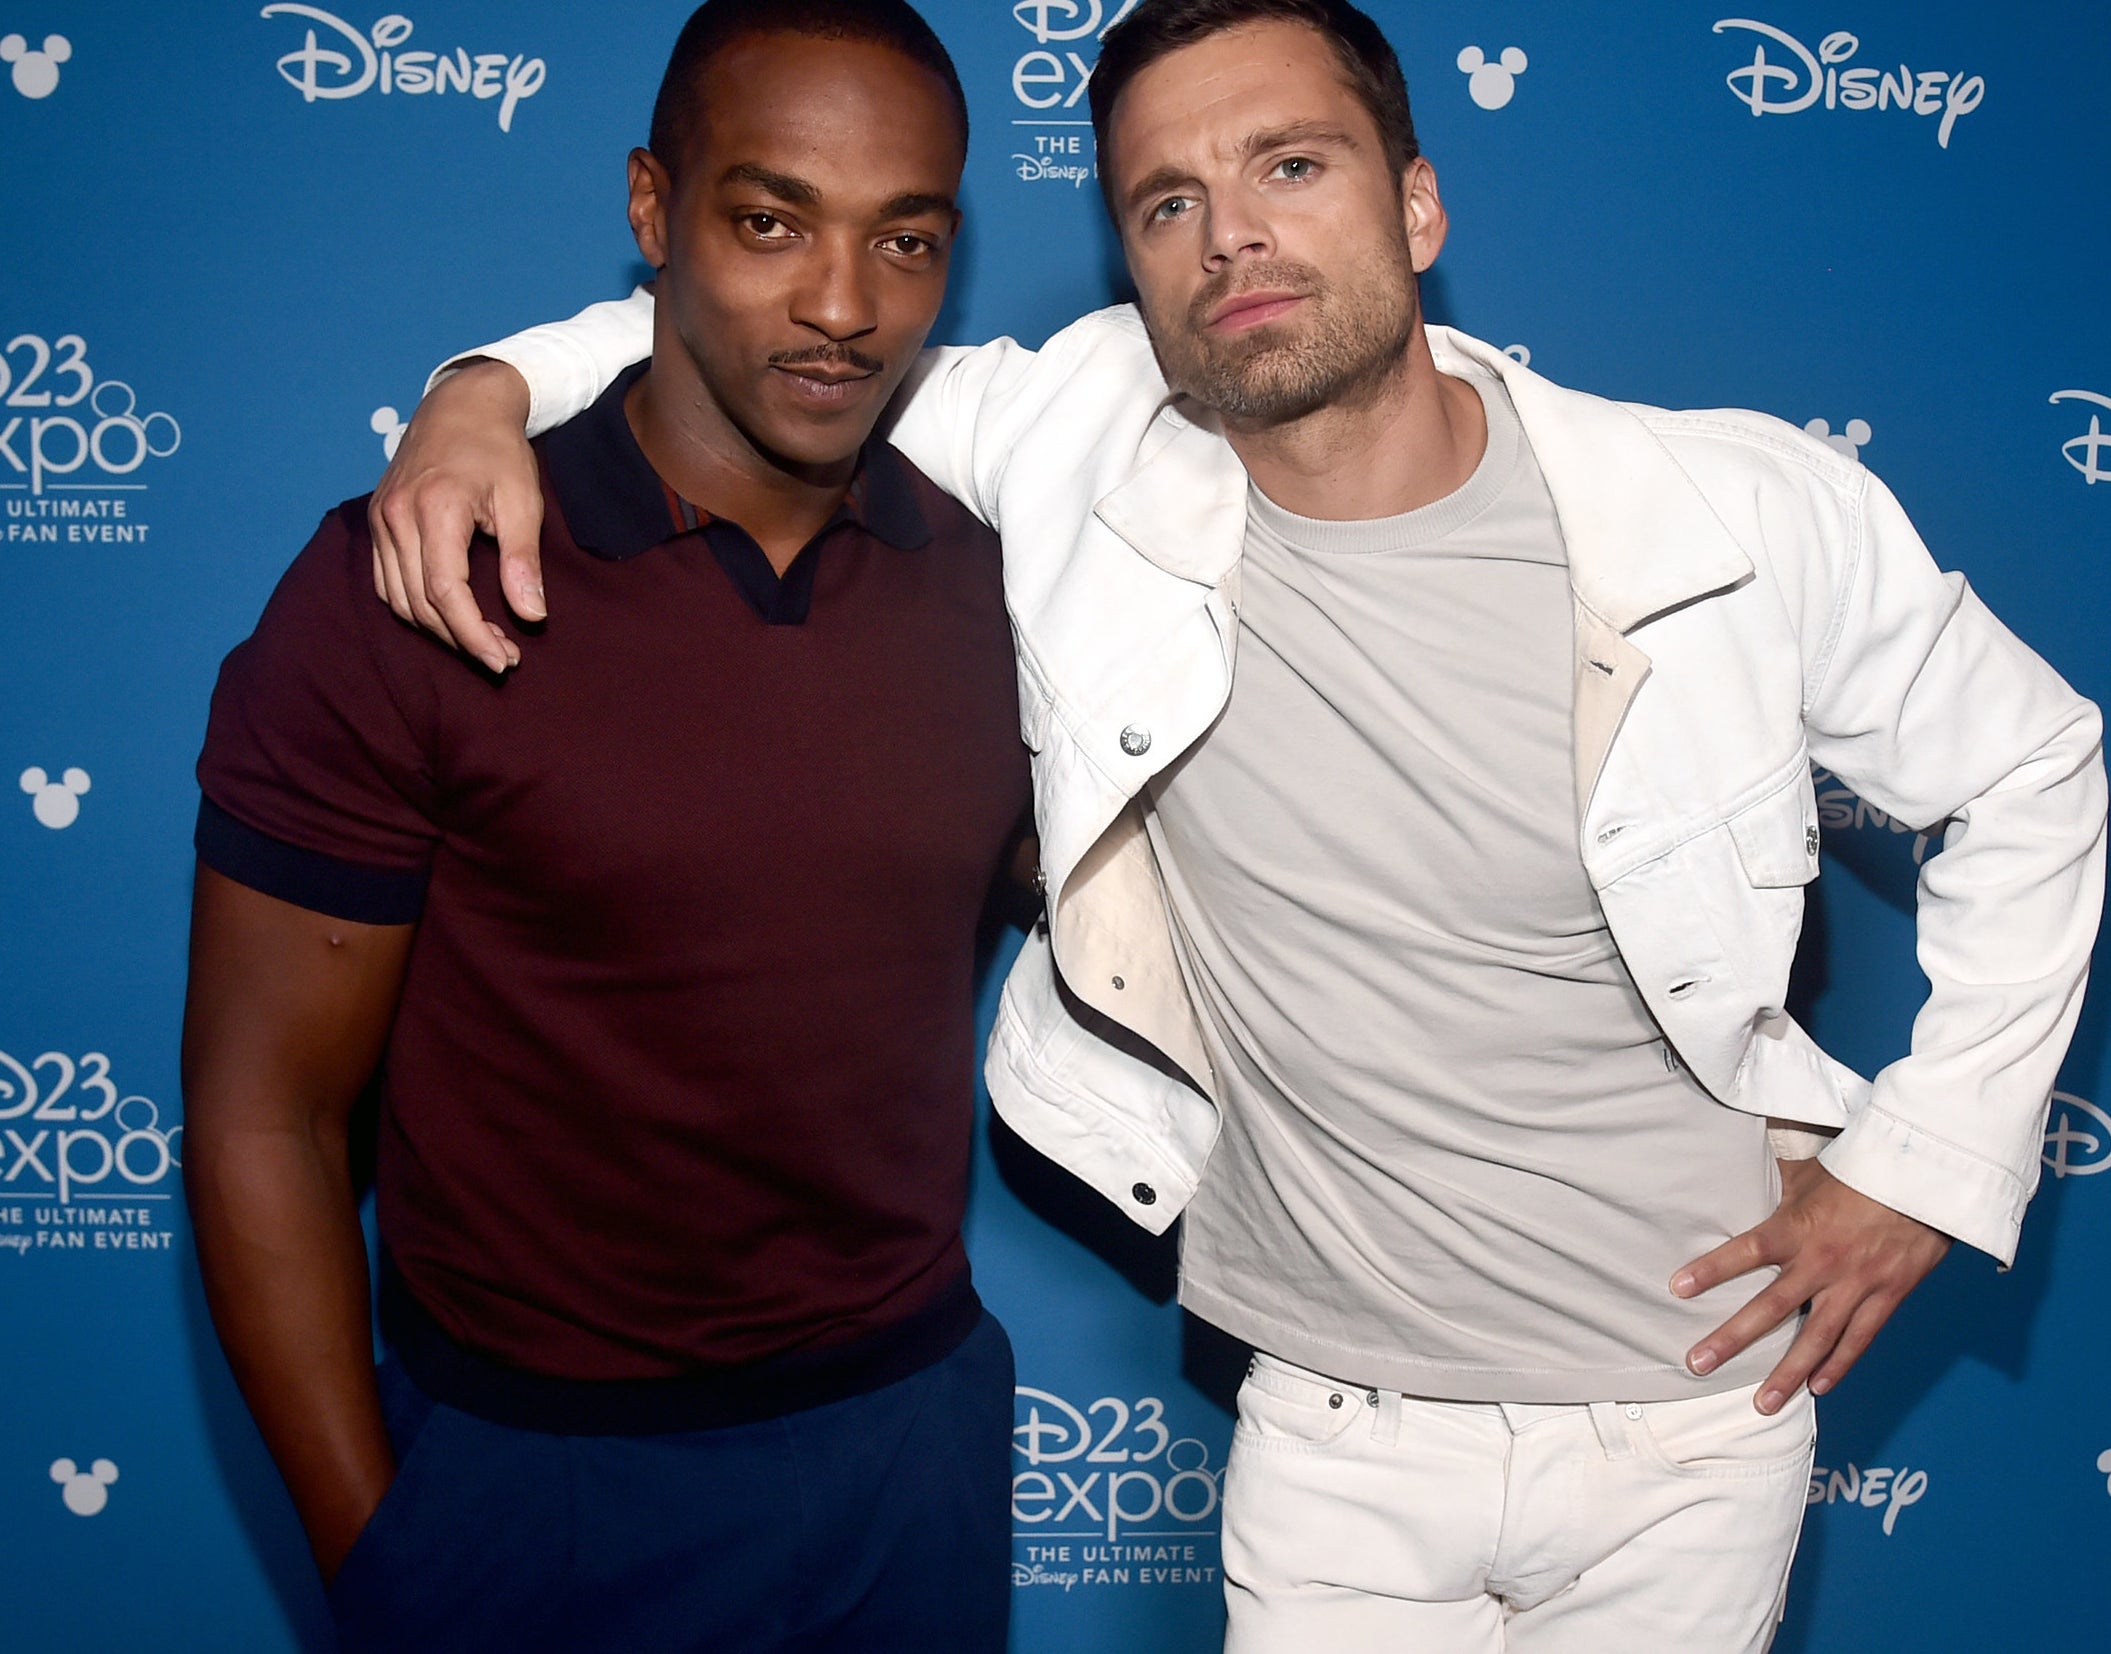 Sebastian Stan, who plays Bucky, puts his arm around Anthony at an event